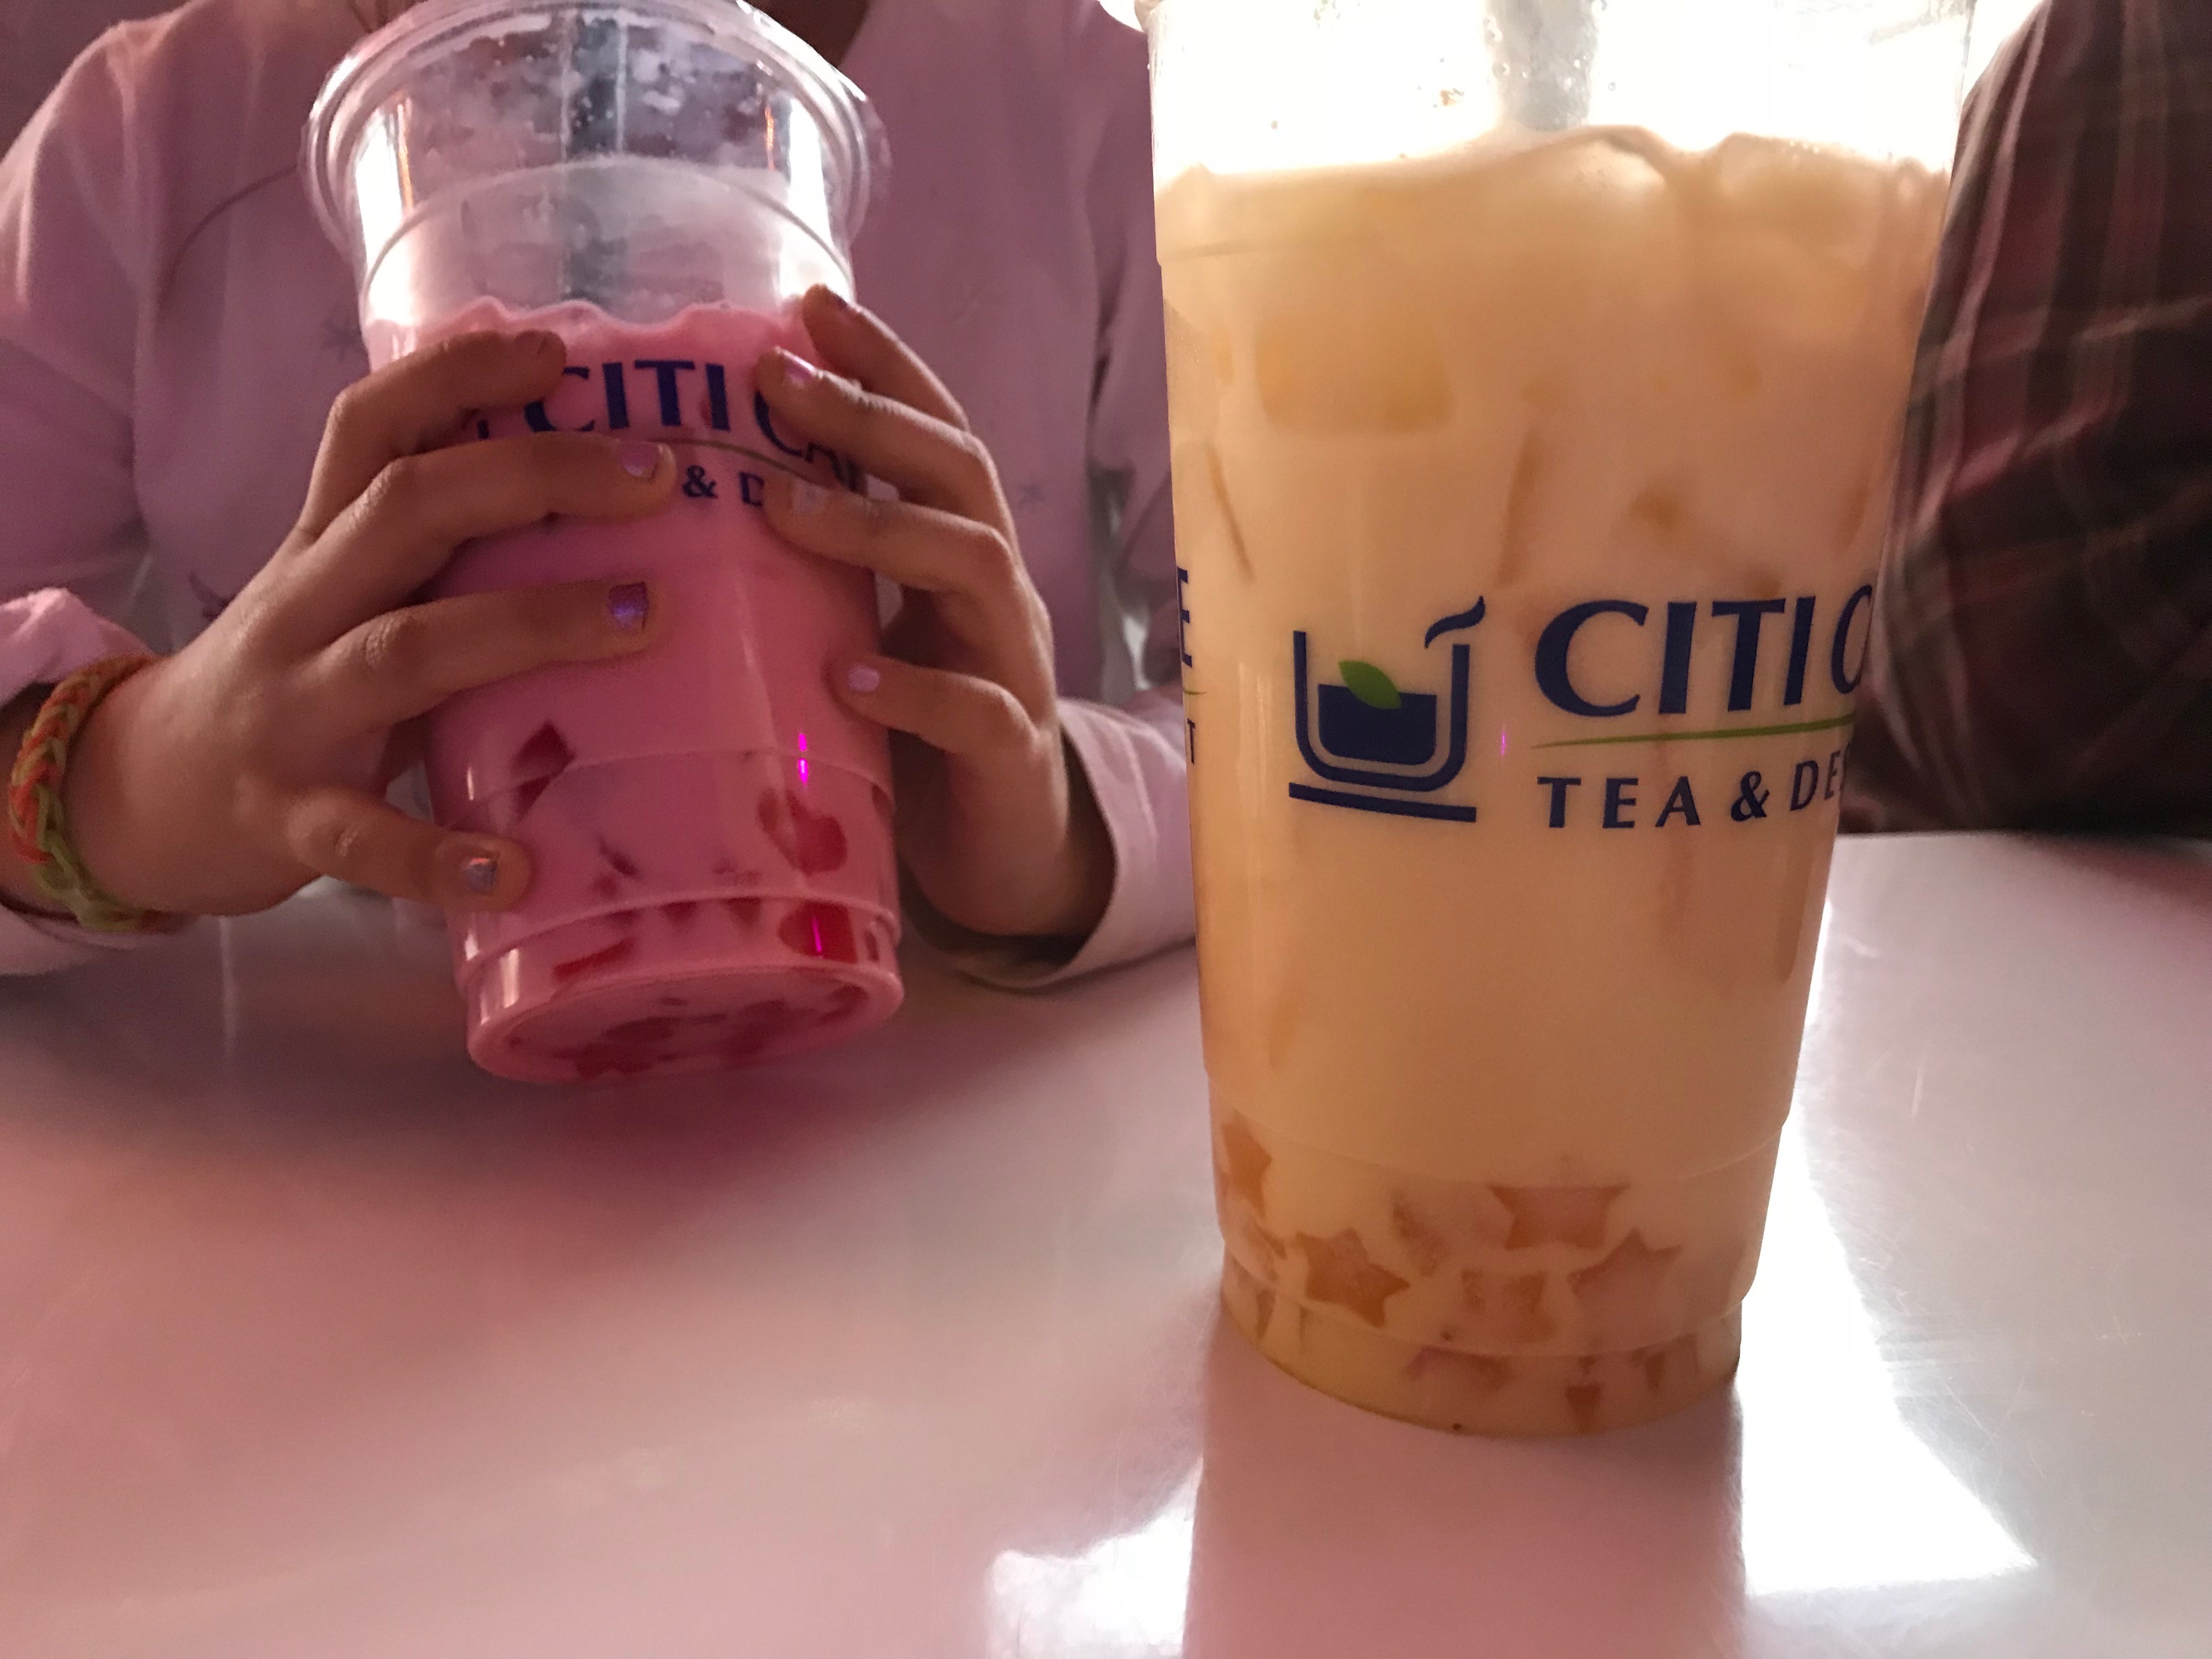 Milk teas - strawberry with jelly hearts and mango with jelly stars